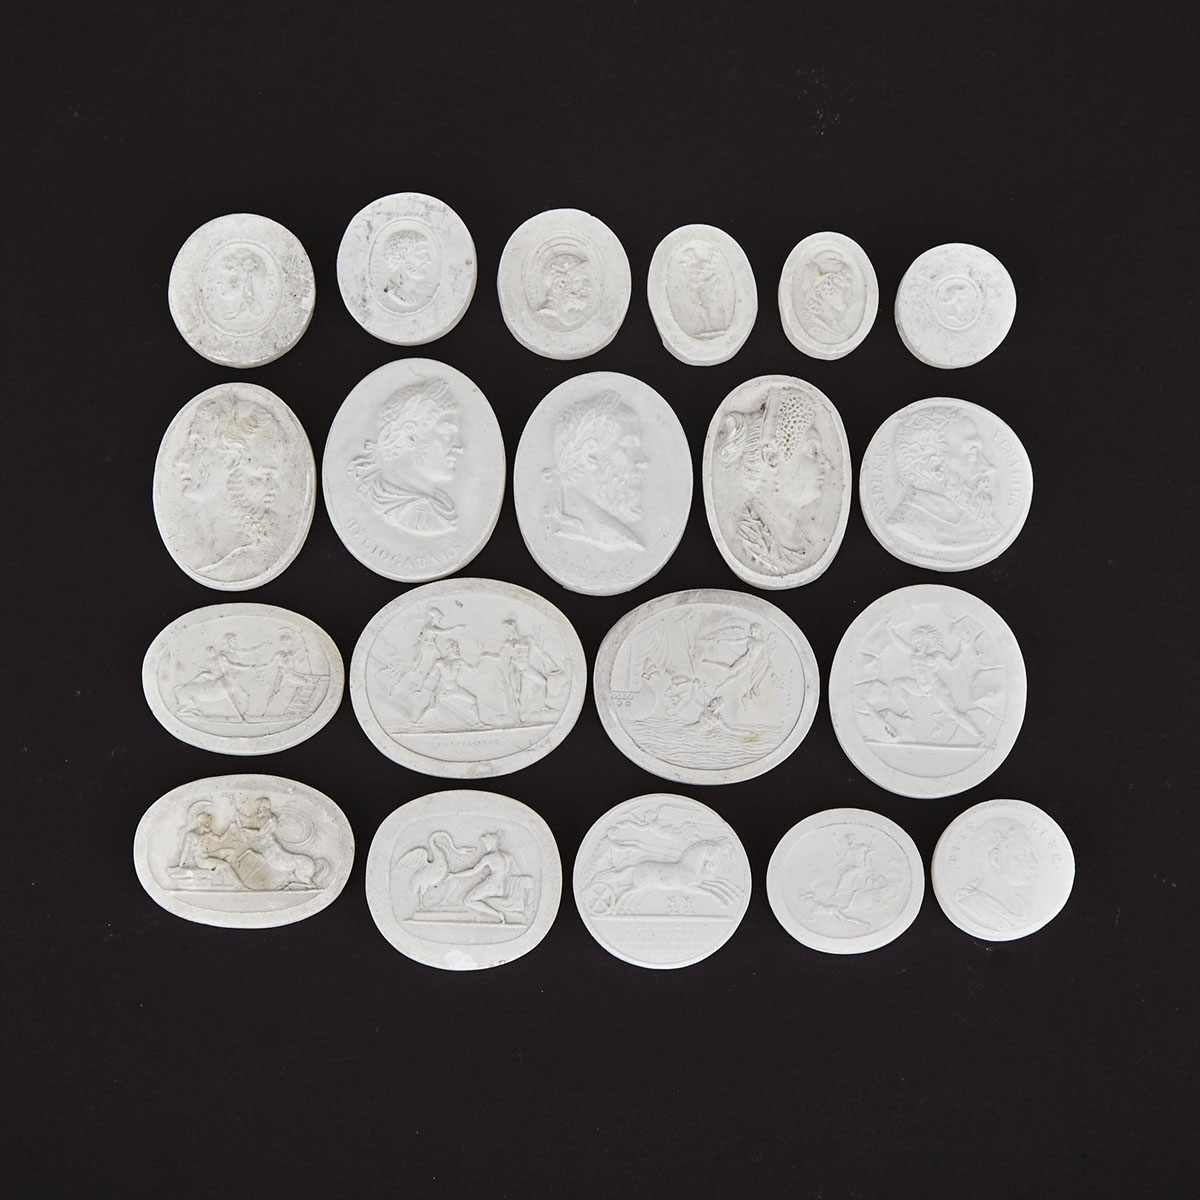 Group of 20 Italian Plaster Intaglios, 19th/early 20th century